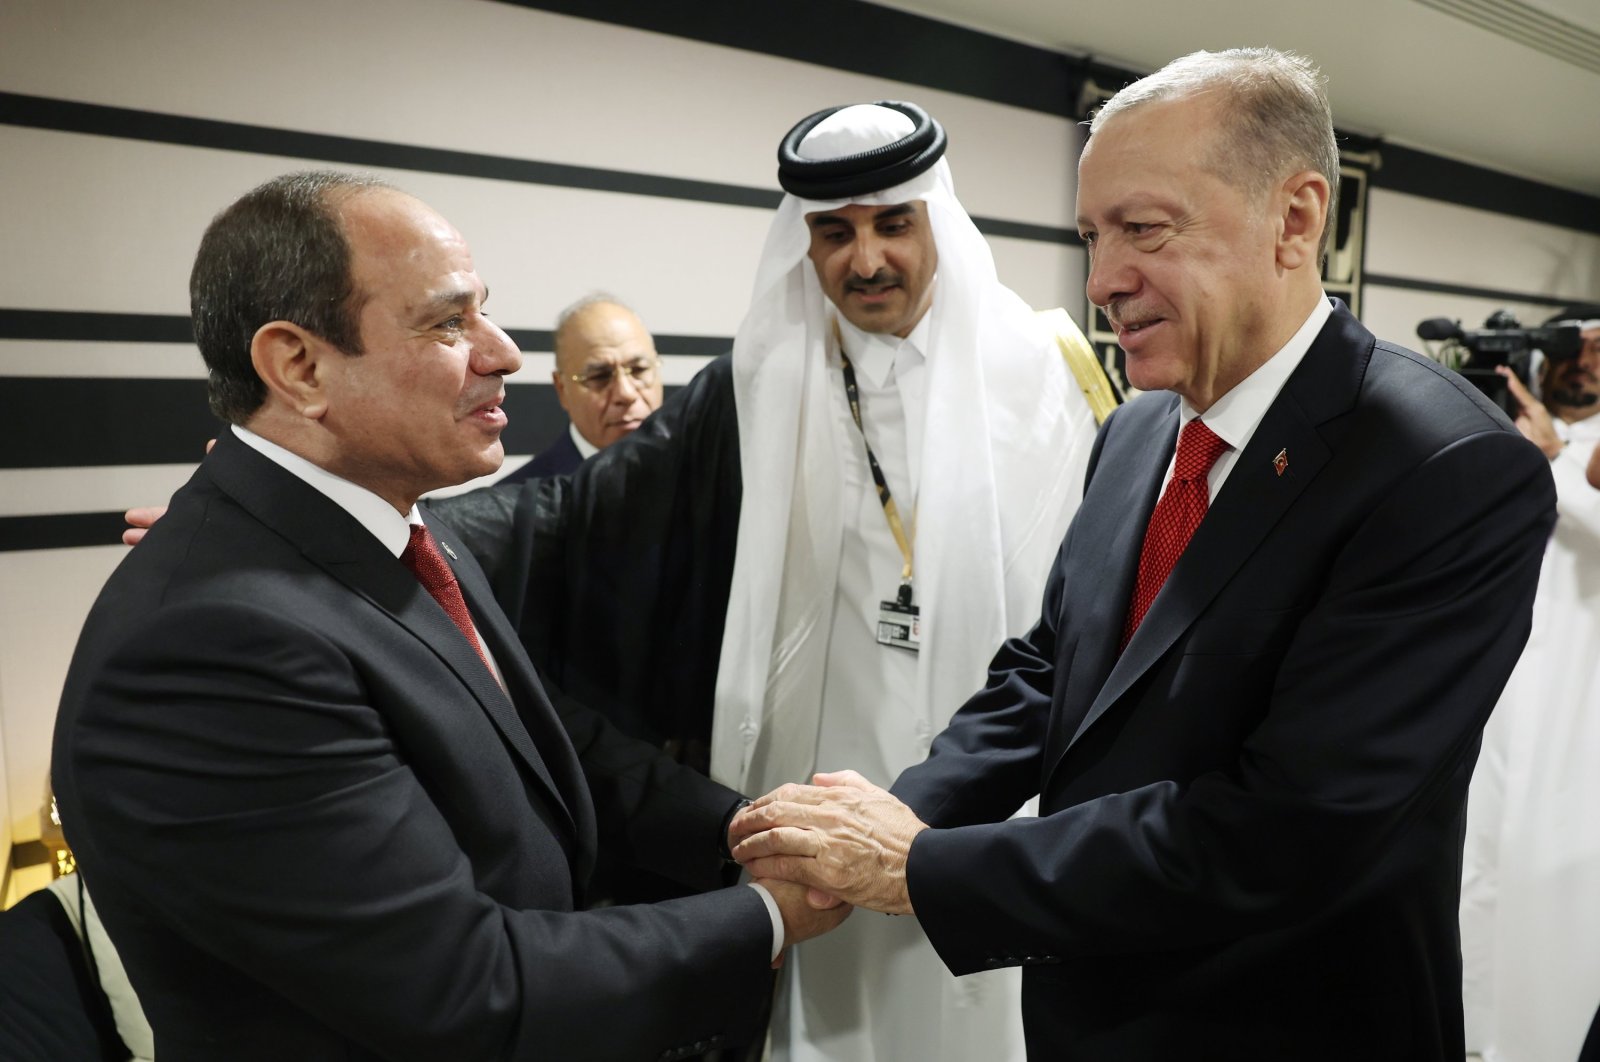 President Recep Tayyip Erdoğan shakes hands with his Egyptian counterpart Abdel-Fattah el-Sissi (L) during their meeting at the opening ceremony of the World Cup in Doha, Qatar, Nov. 20, 2022. (EPA Photo)